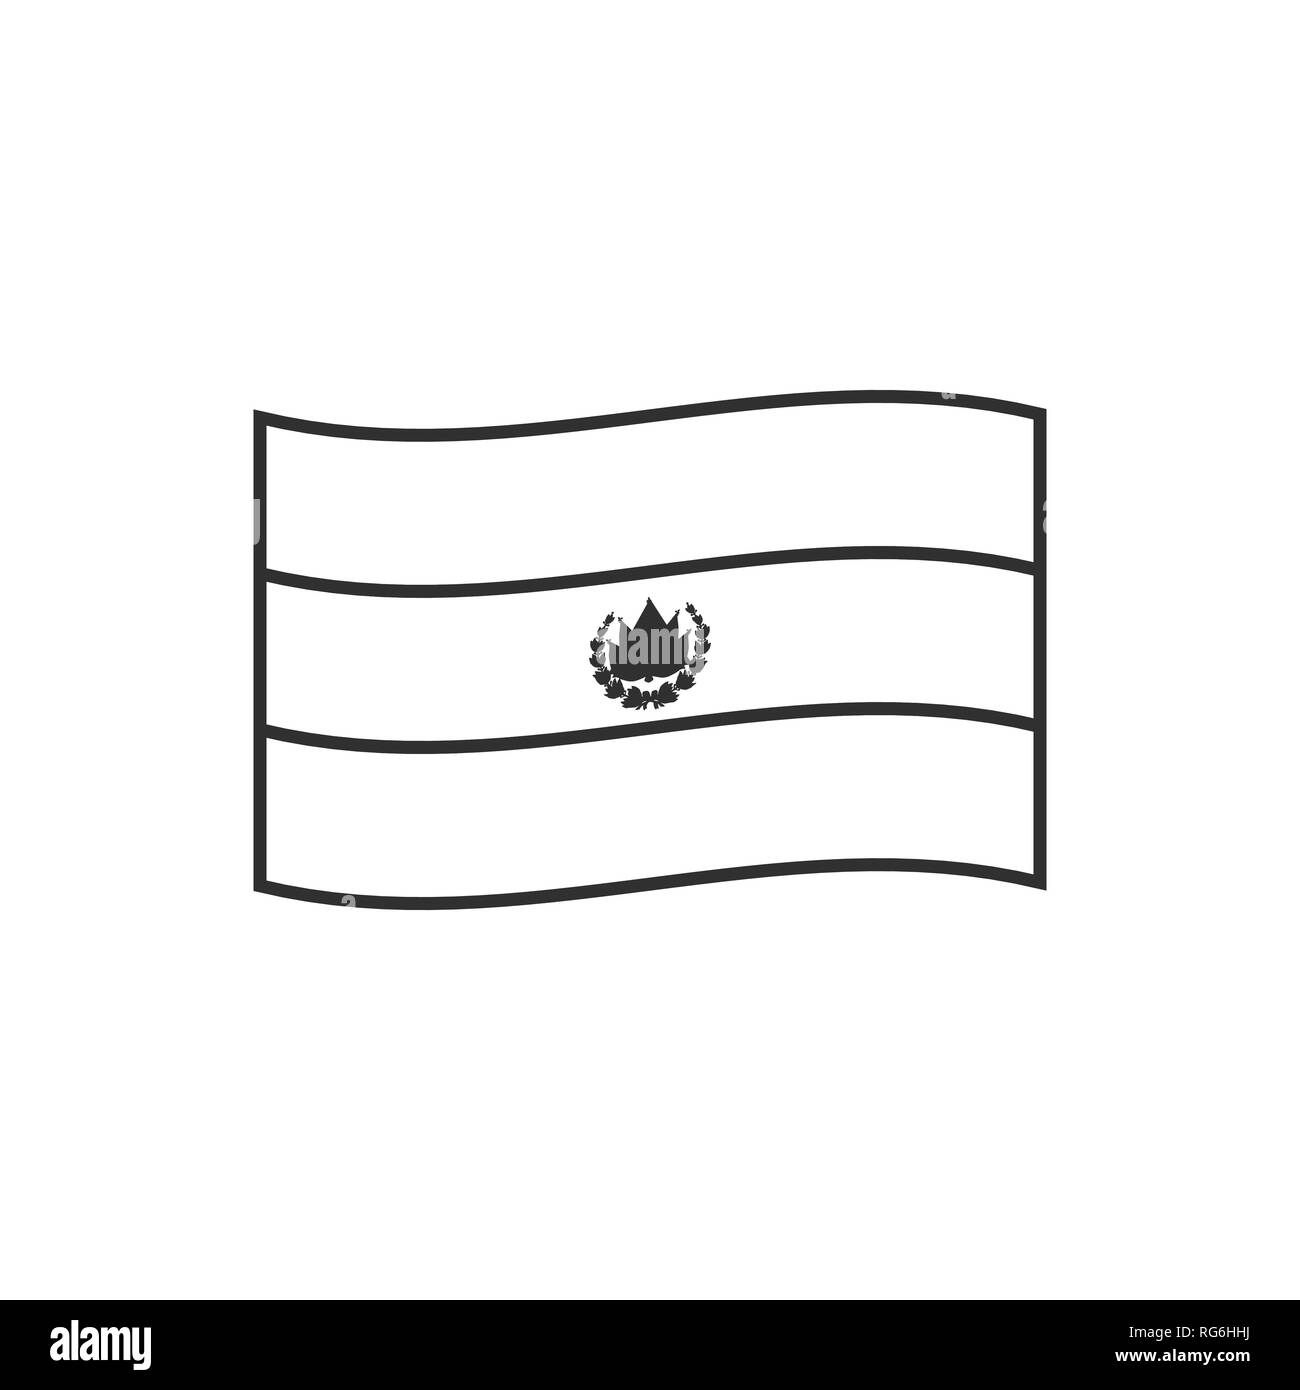 El salvador flag icon in black outline flat design independence day or national day holiday concept stock vector image art